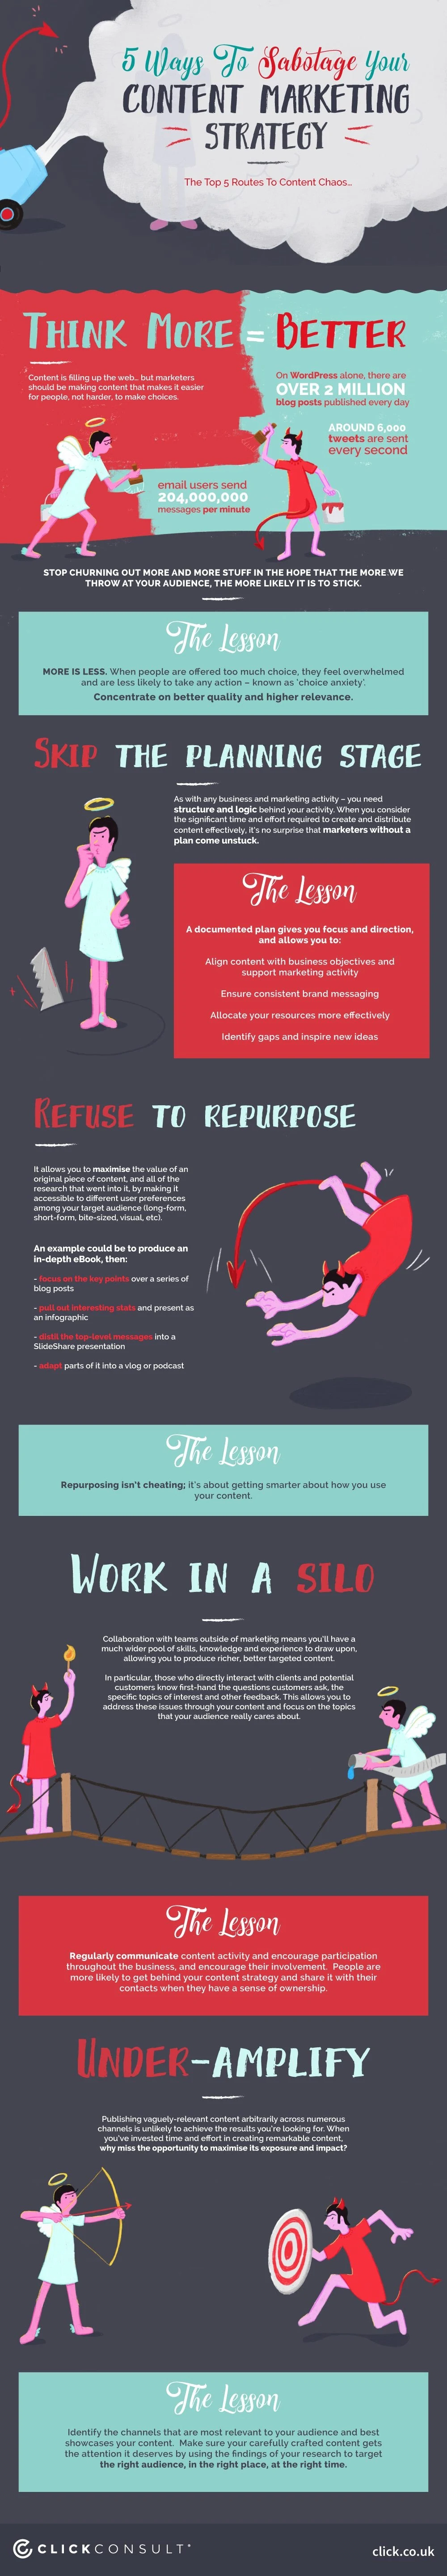 5 Ways to Sabotage Your Content Marketing Strategy - #Infographic